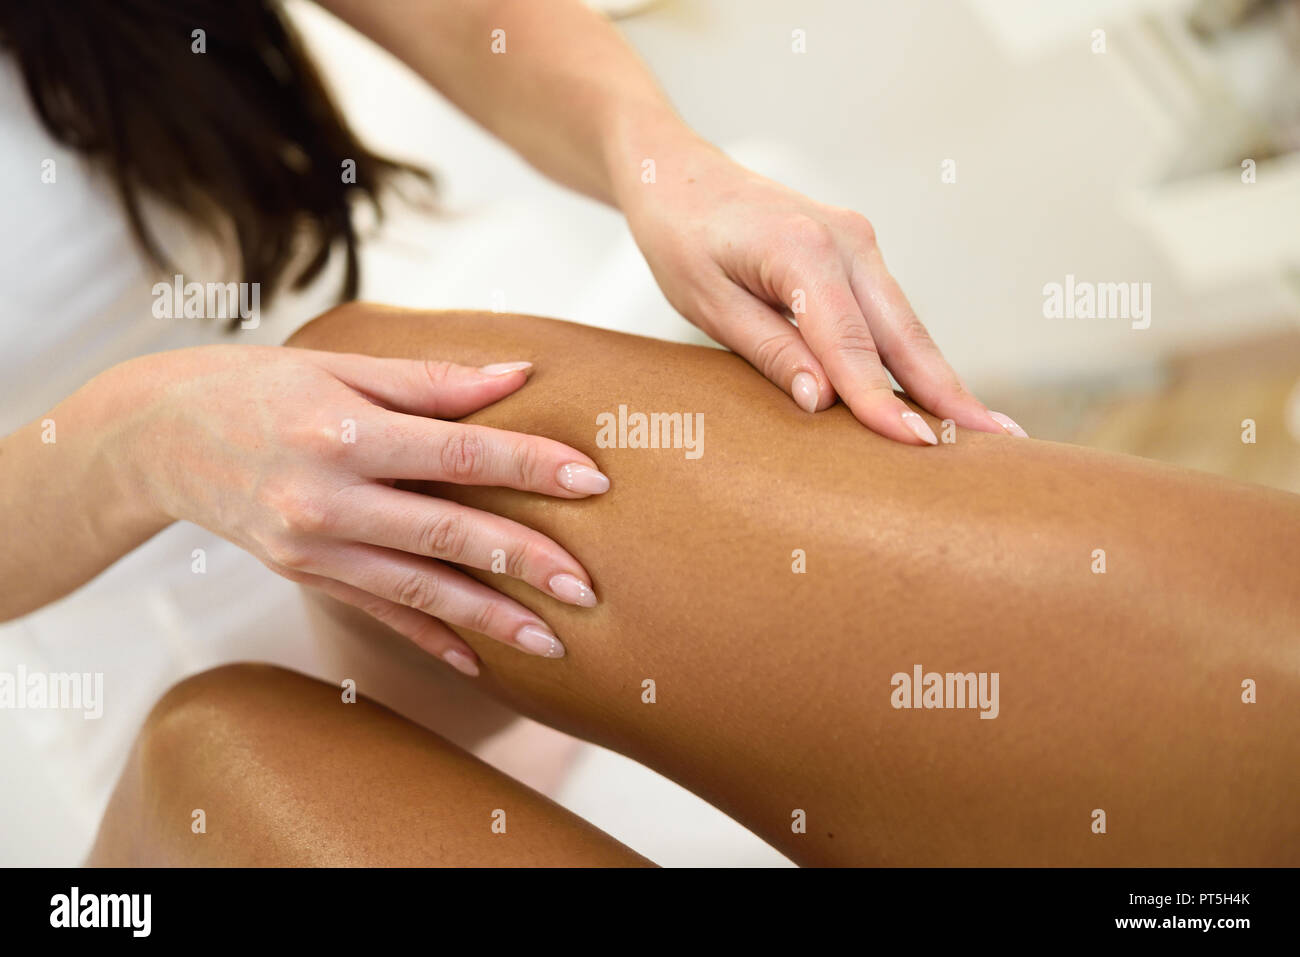 Beauty massage in the leg in a beauty salon. Beautician giving a massage with oil on the skin. Stock Photo